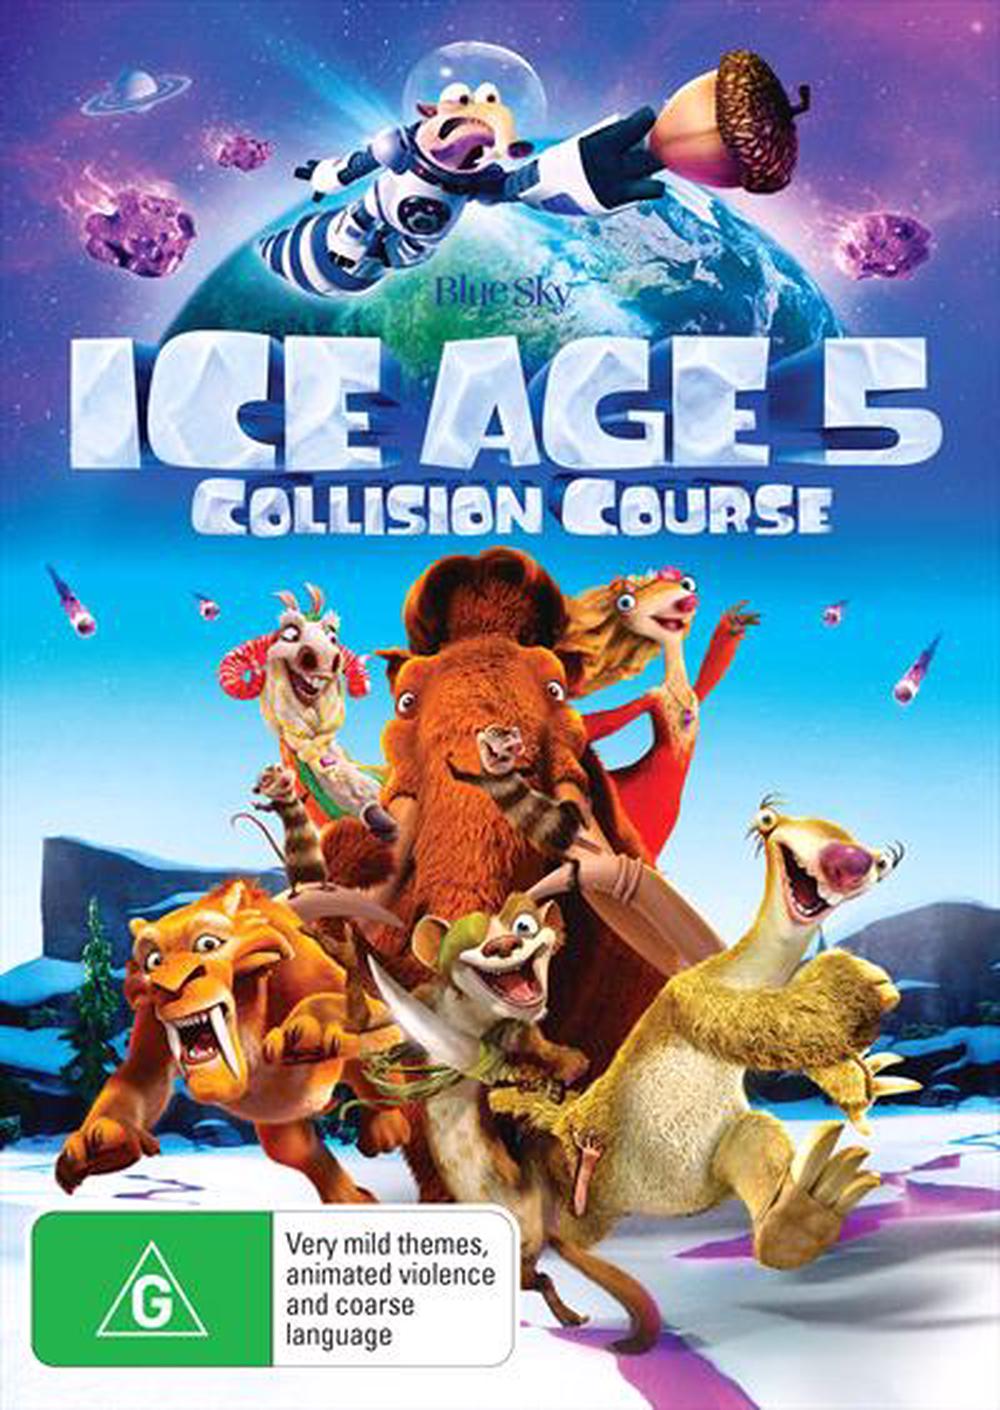 watch ice age 5 full movie online free